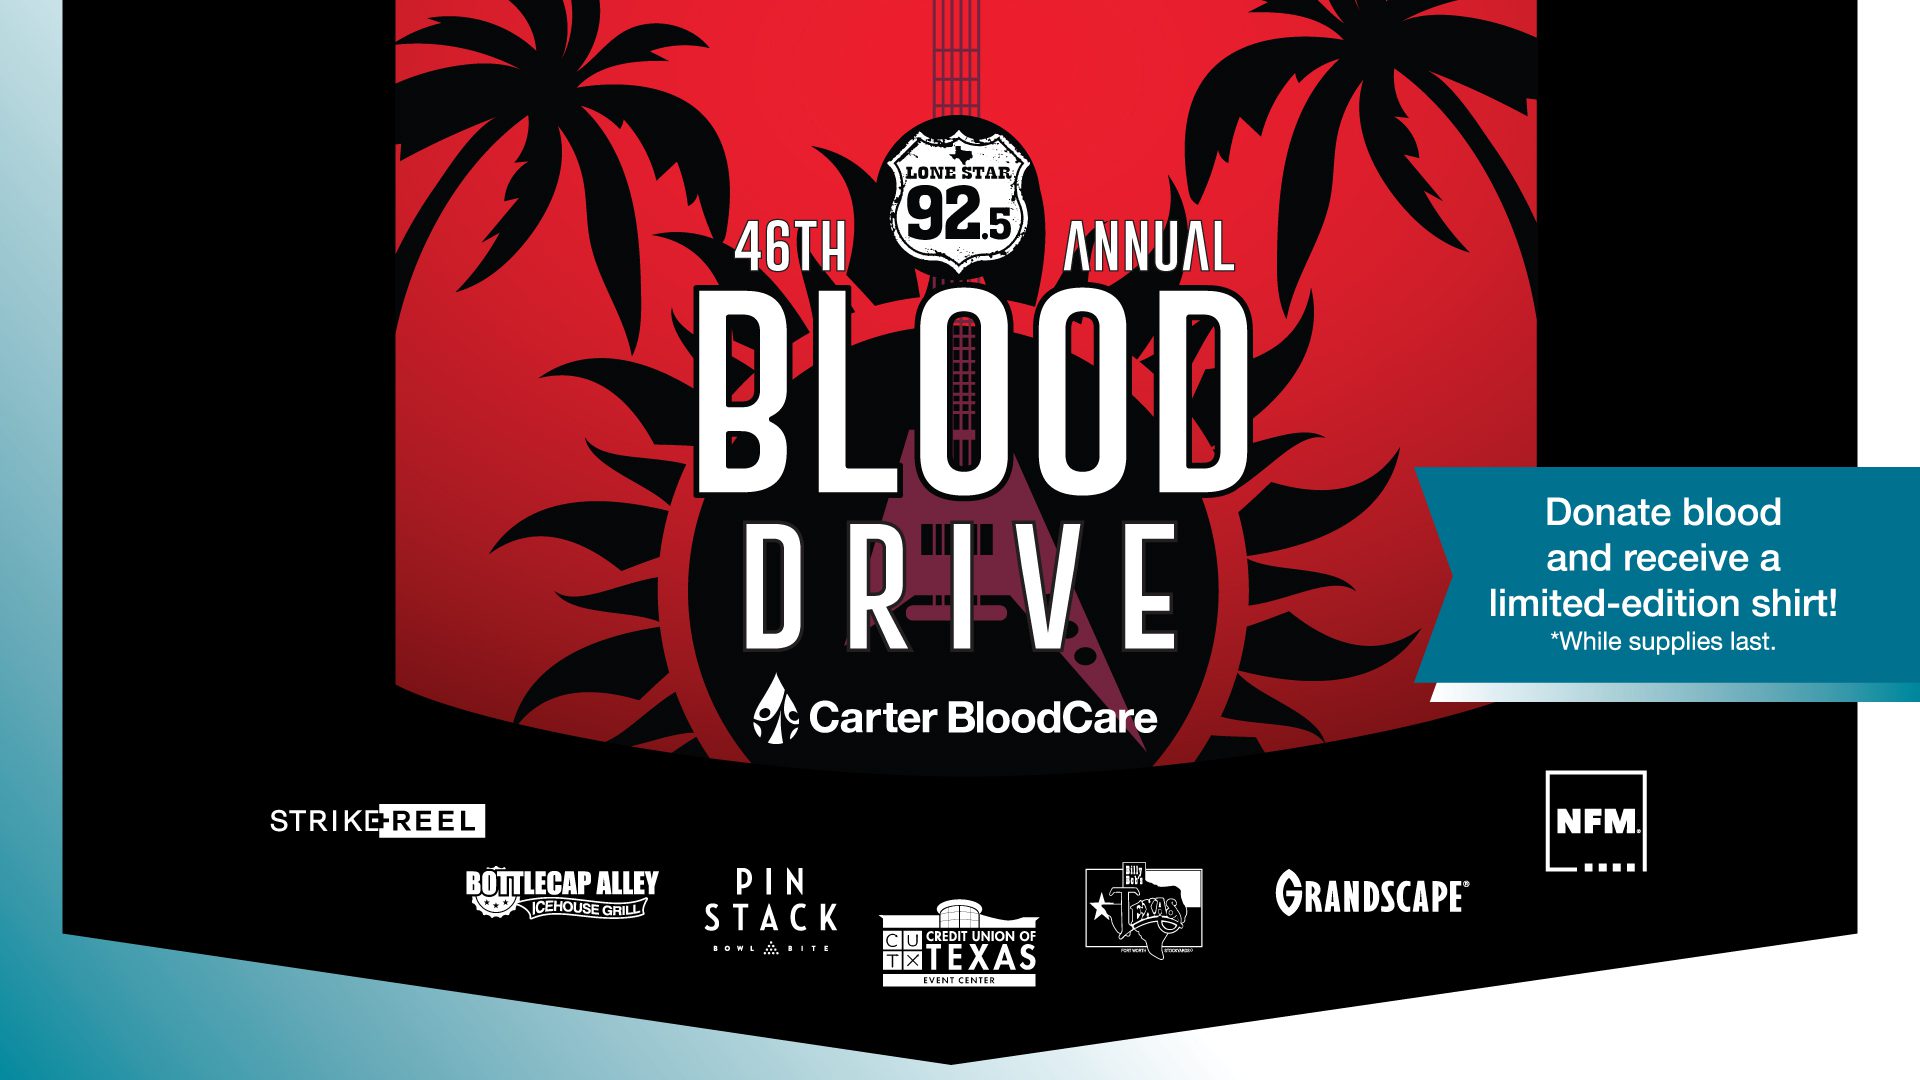 Donate this summer to save lives: An interview with iHeartMedia and Carter BloodCare